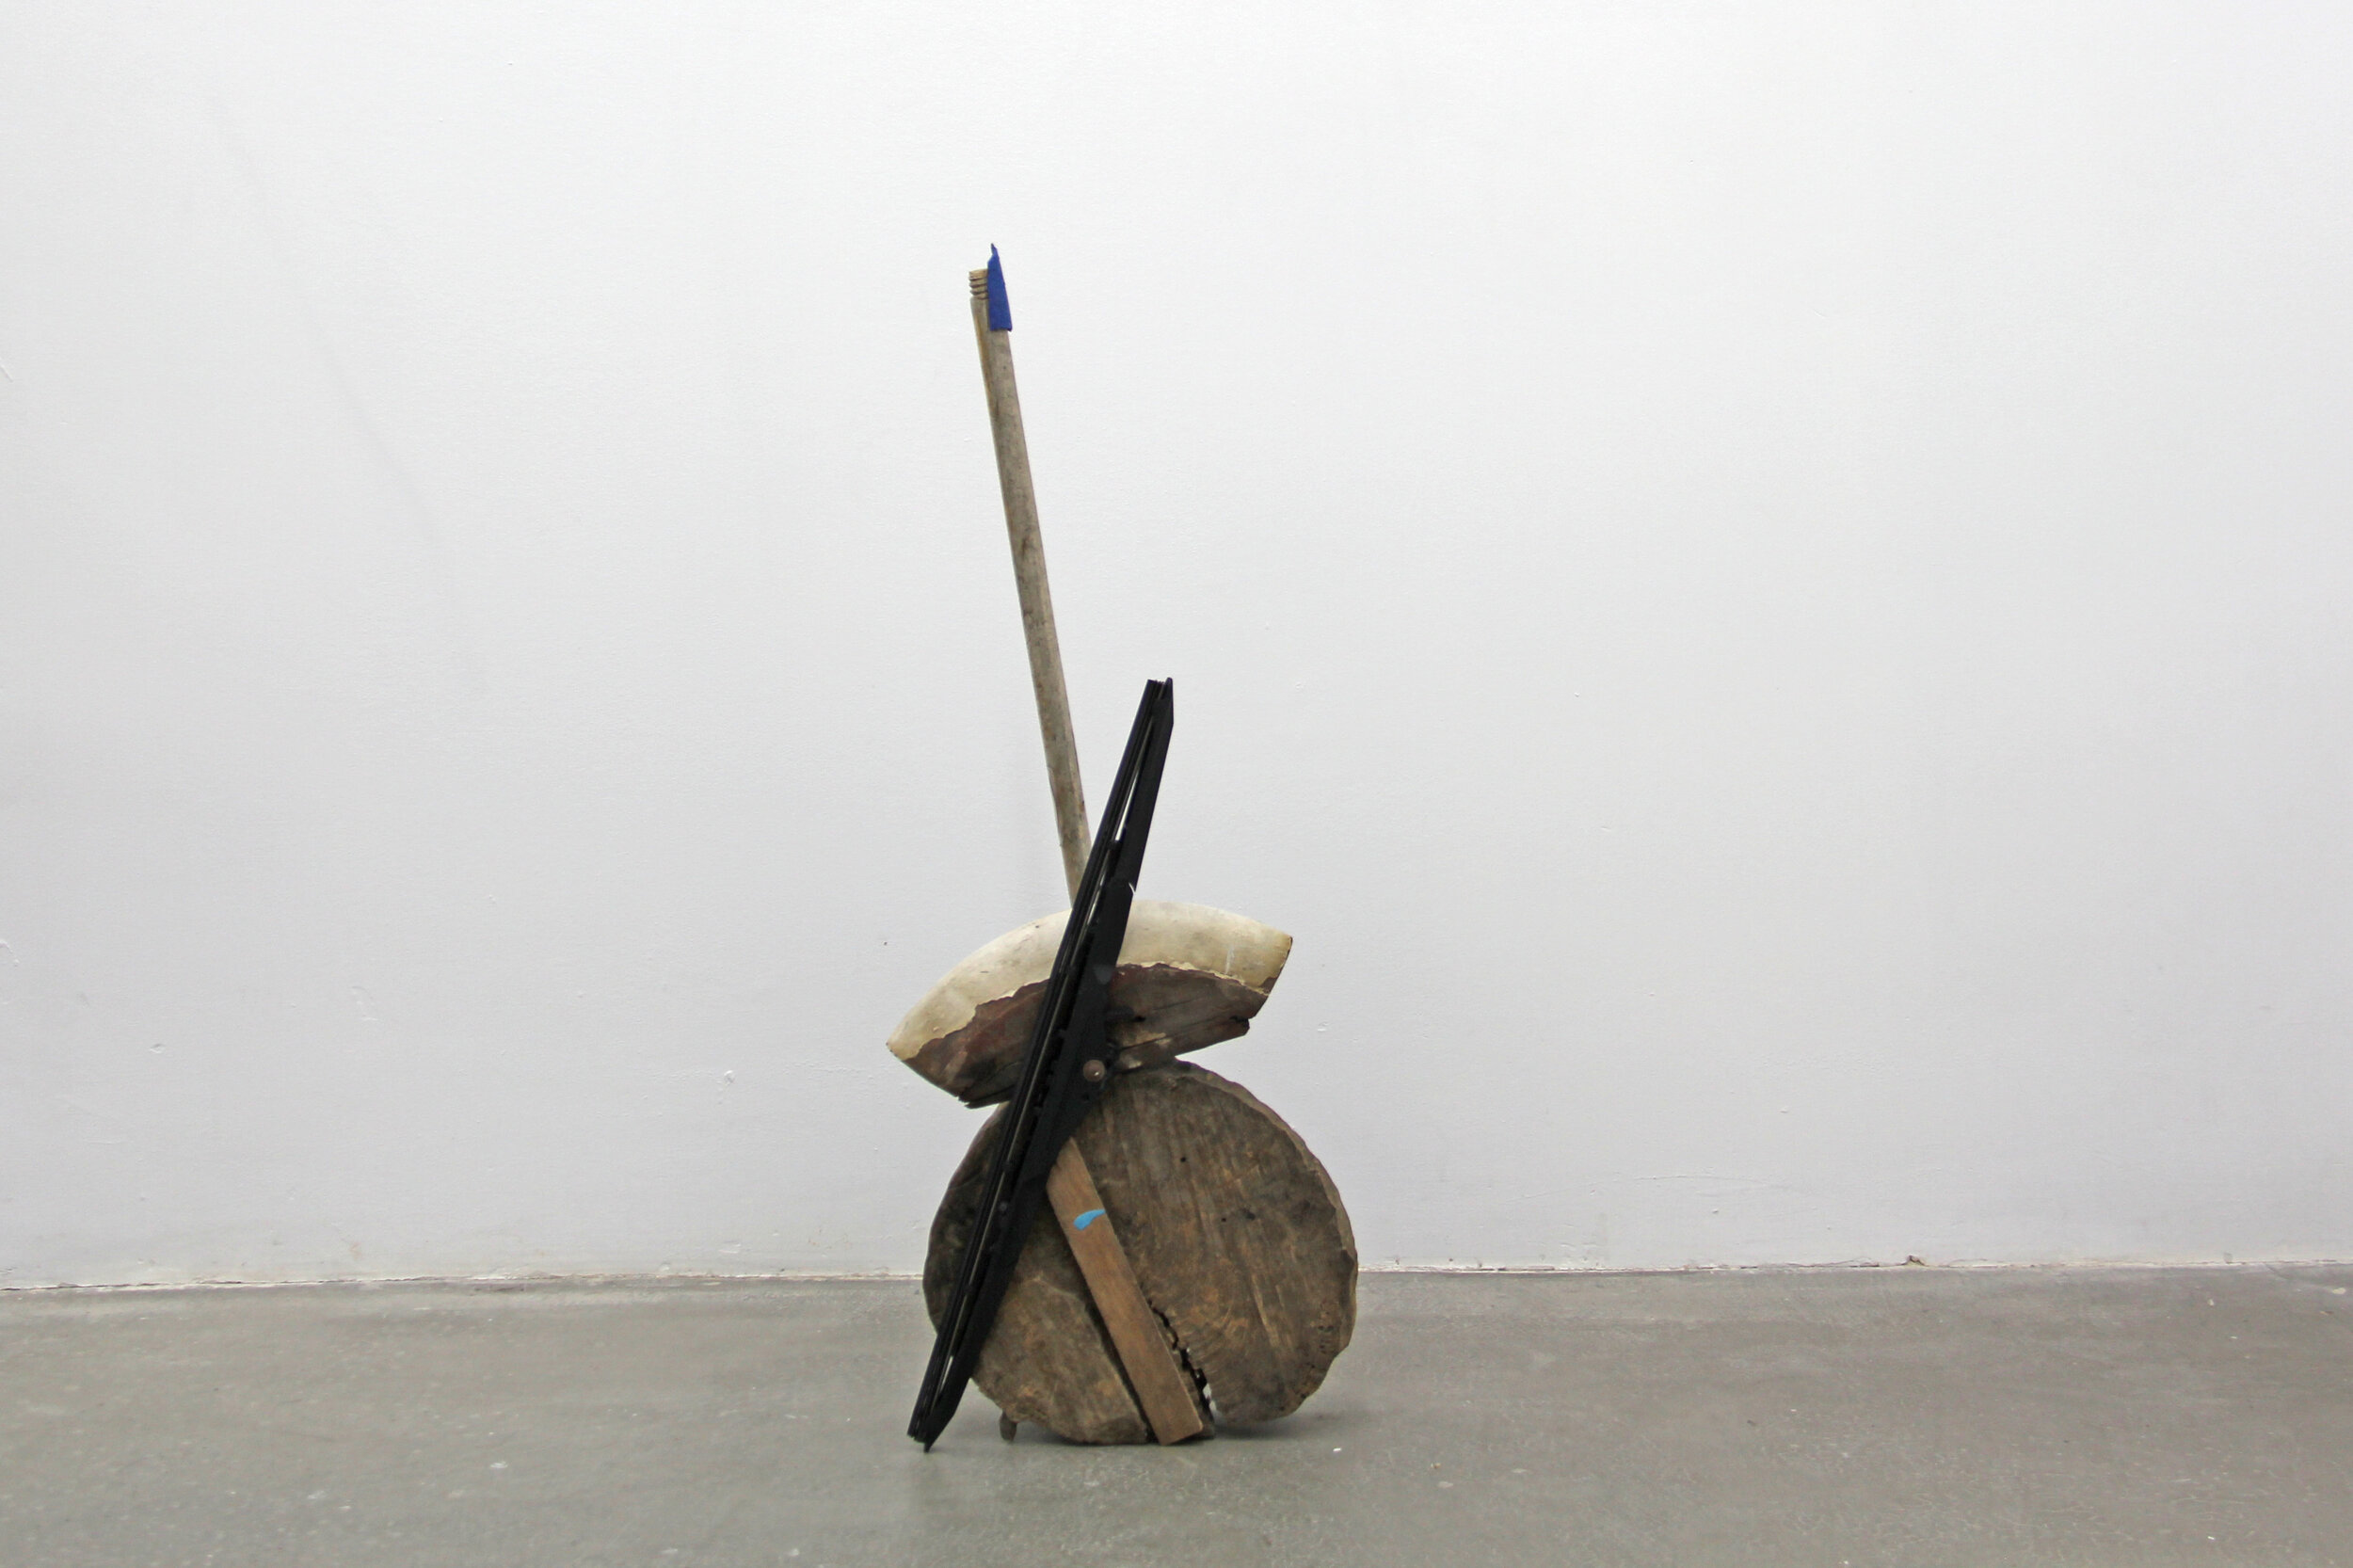  Georgia Dickie,  Weight Station , 2021, Wood and found objects, 27.75 x 11 x 4 in (70.5 x 27.9 x 10.2 cm)  